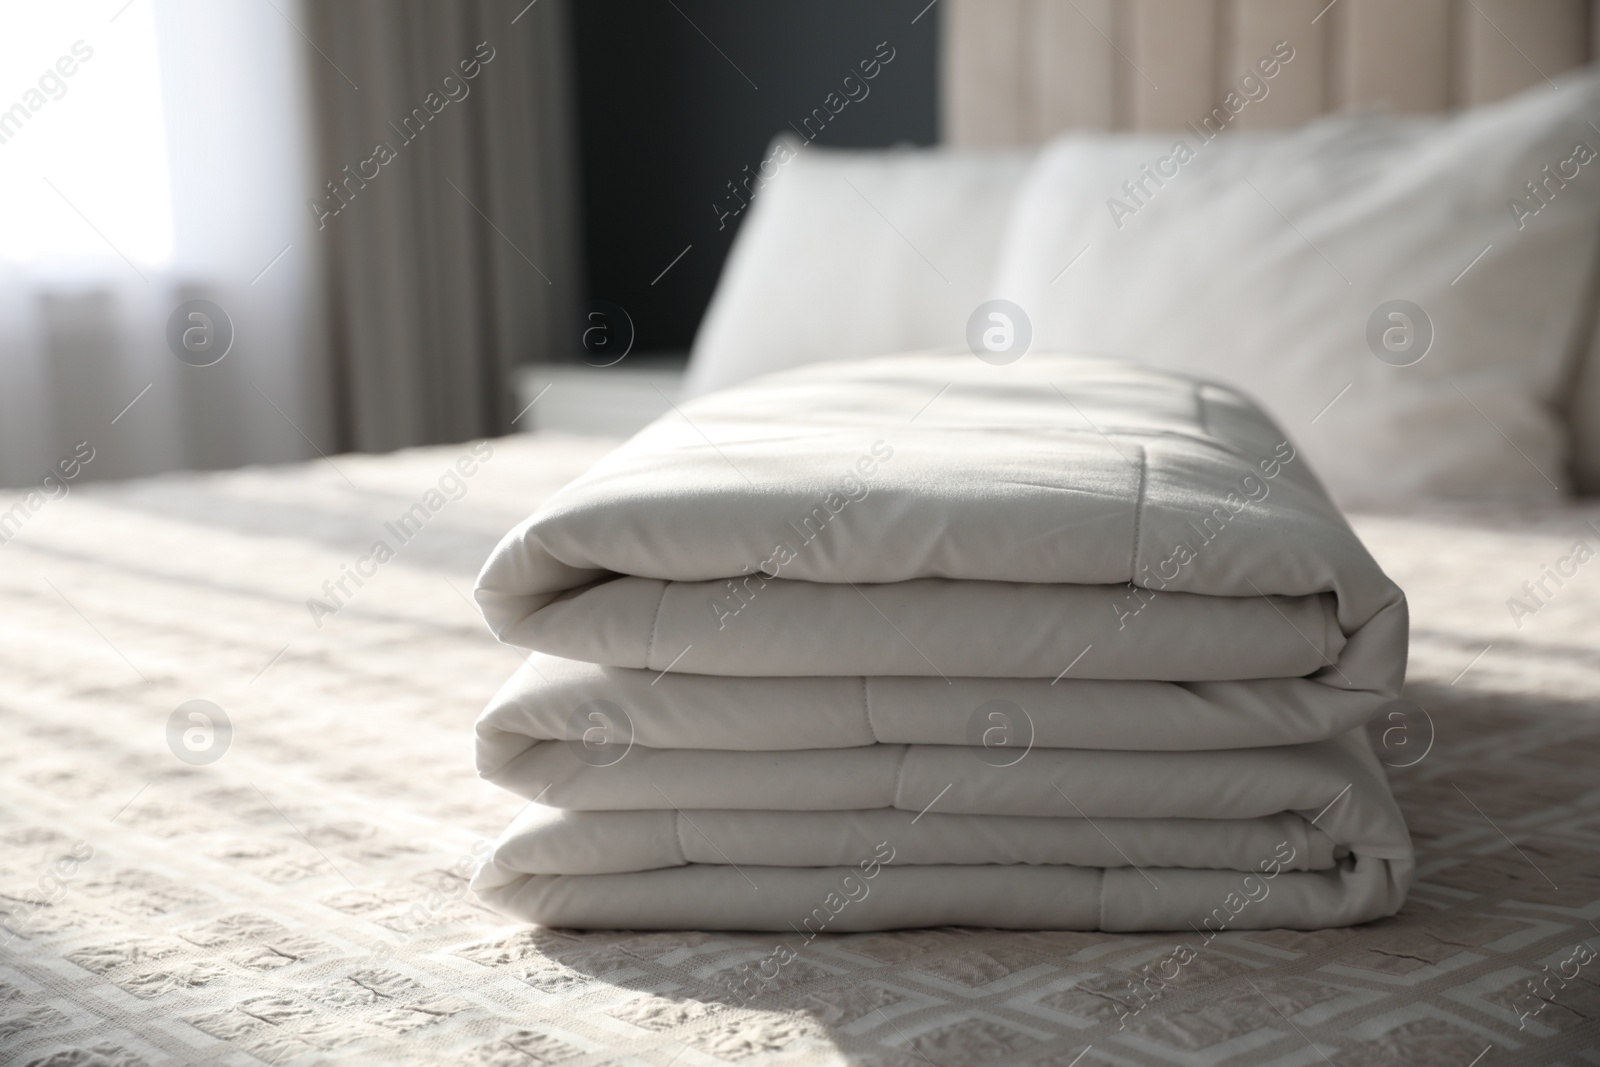 Photo of Folded clean blanket on bed in room